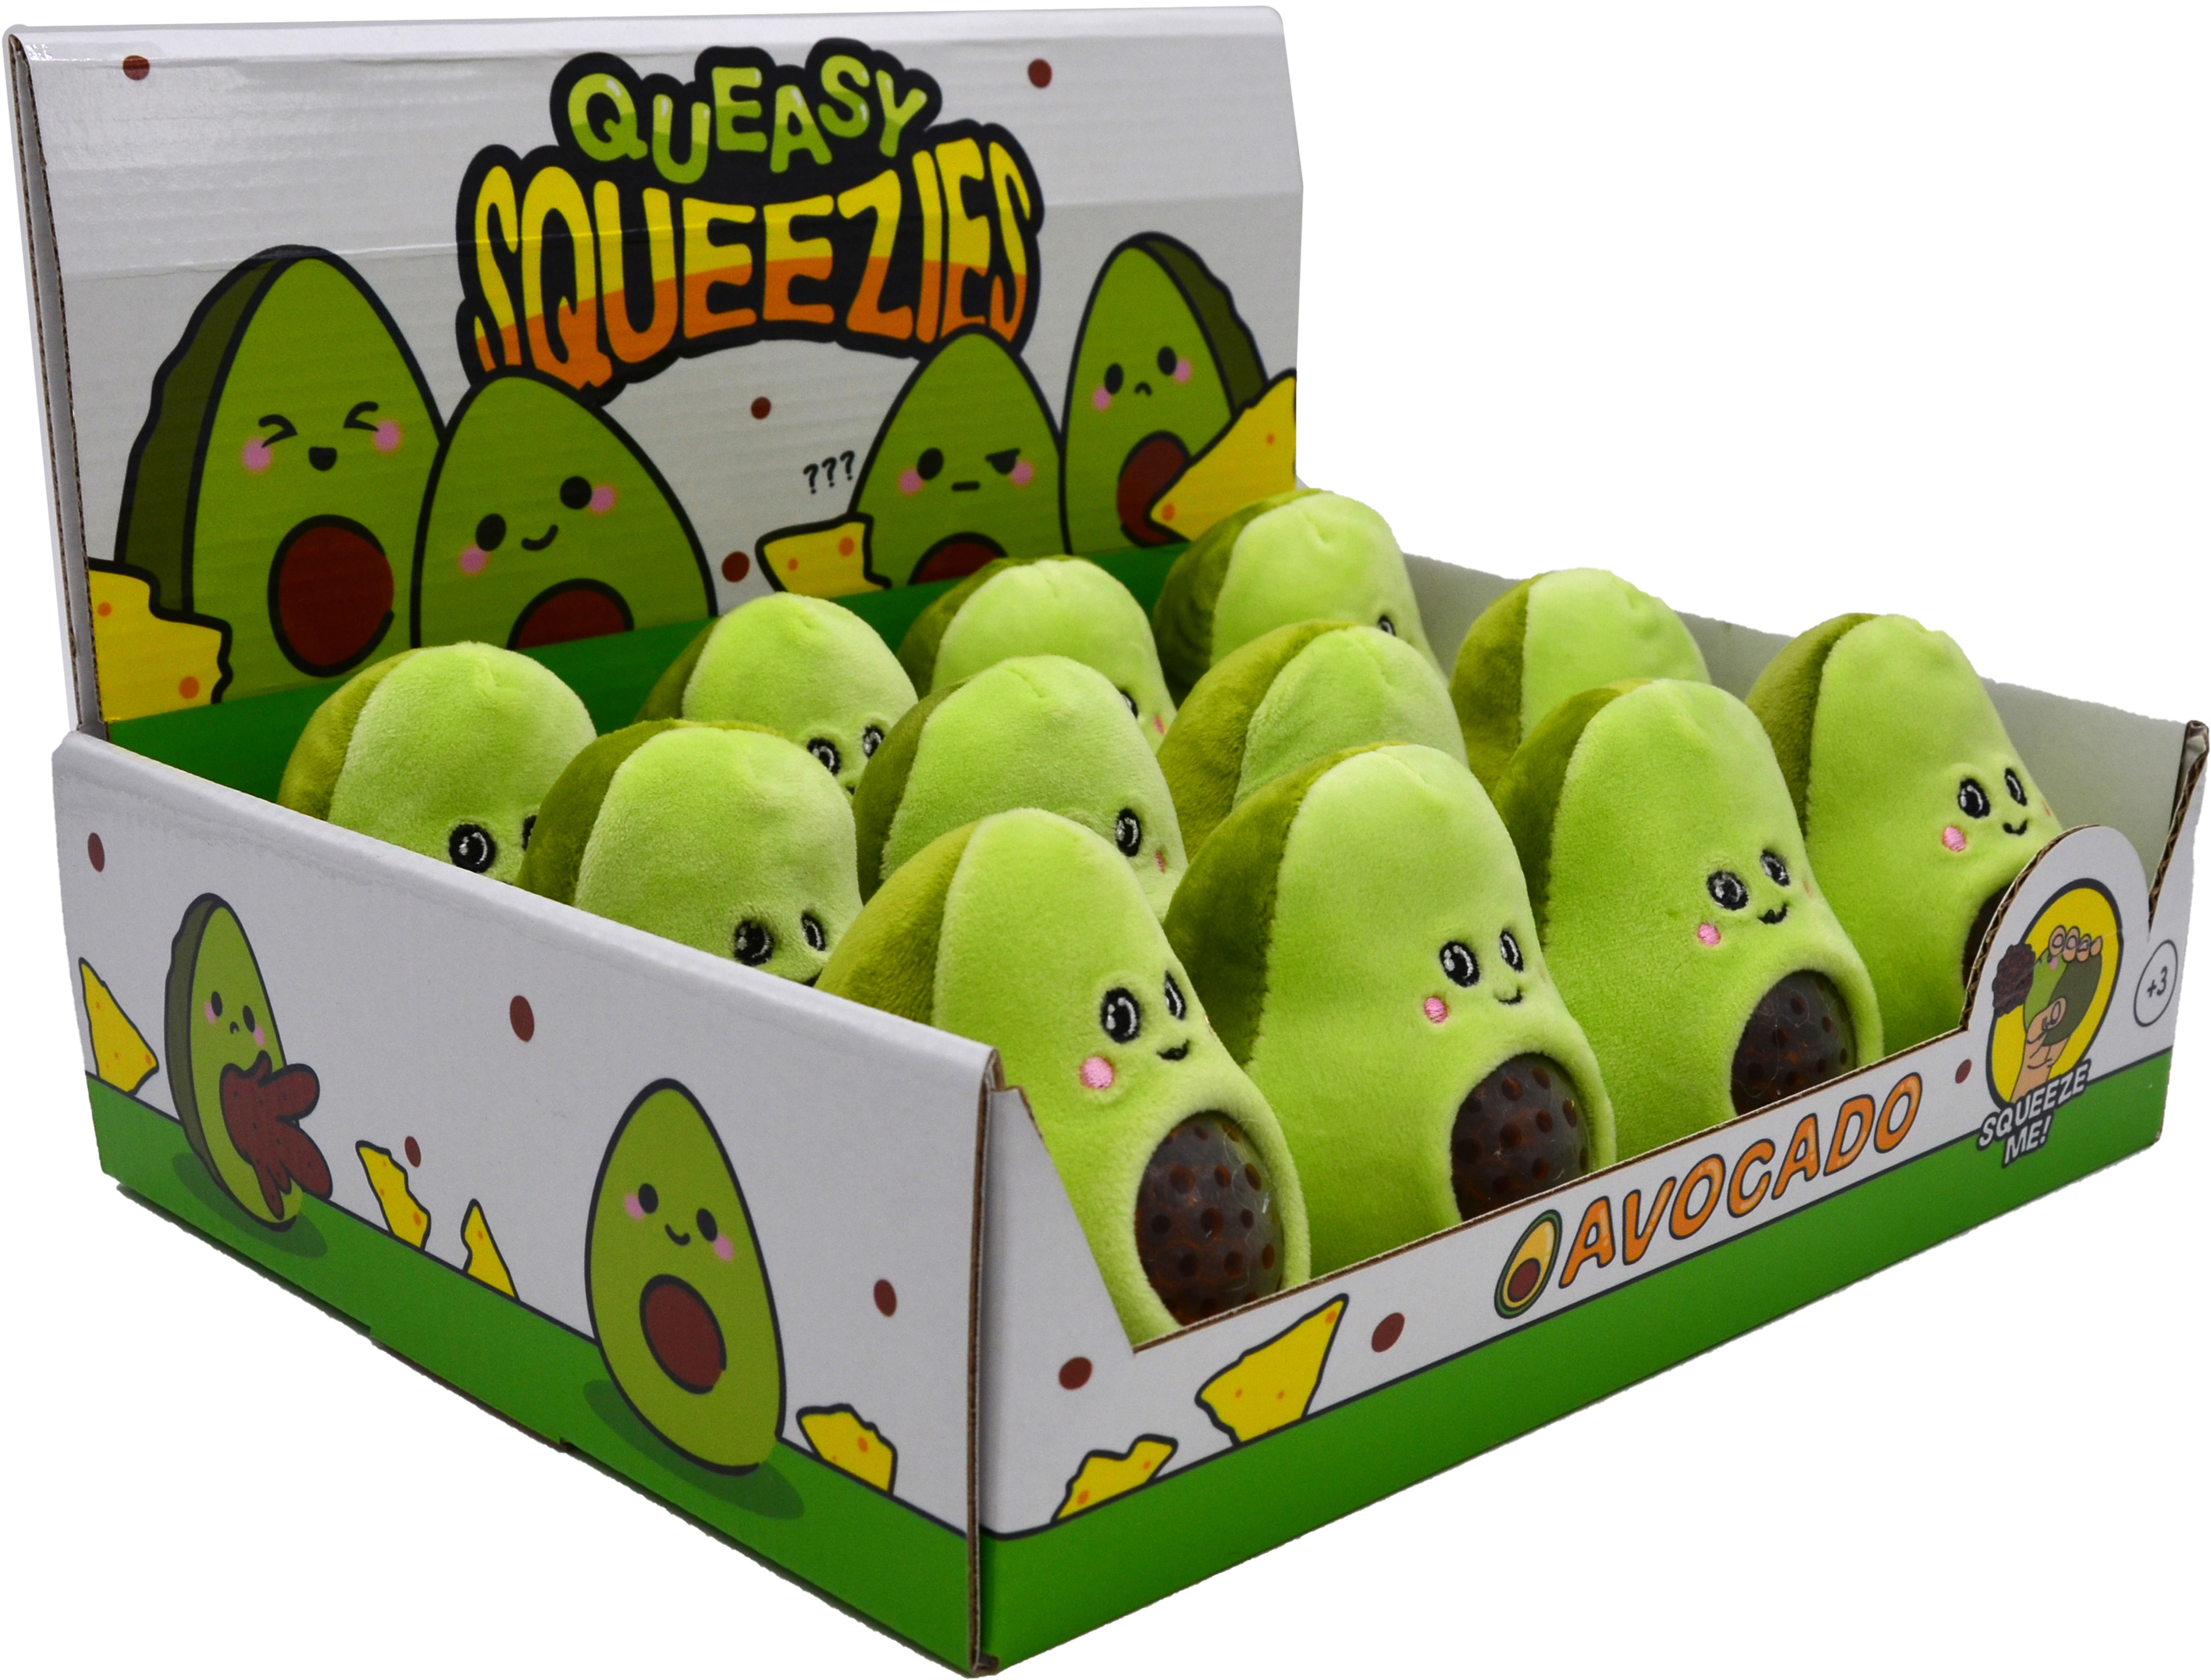 ROOST Squeeze Avocado peluche TY927